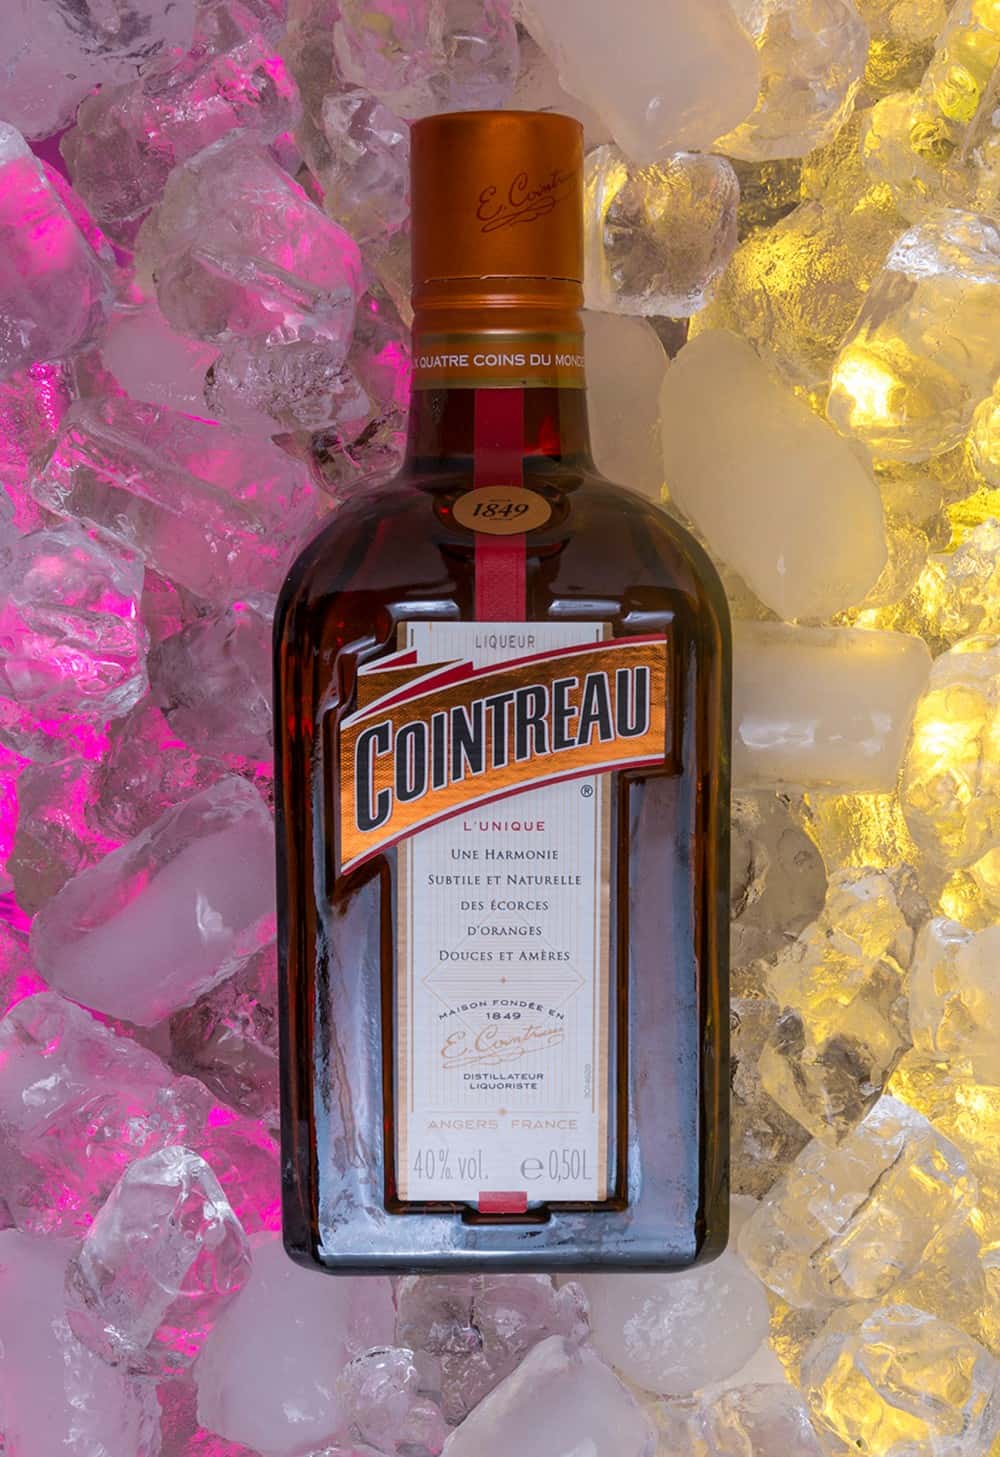 history of cointreau